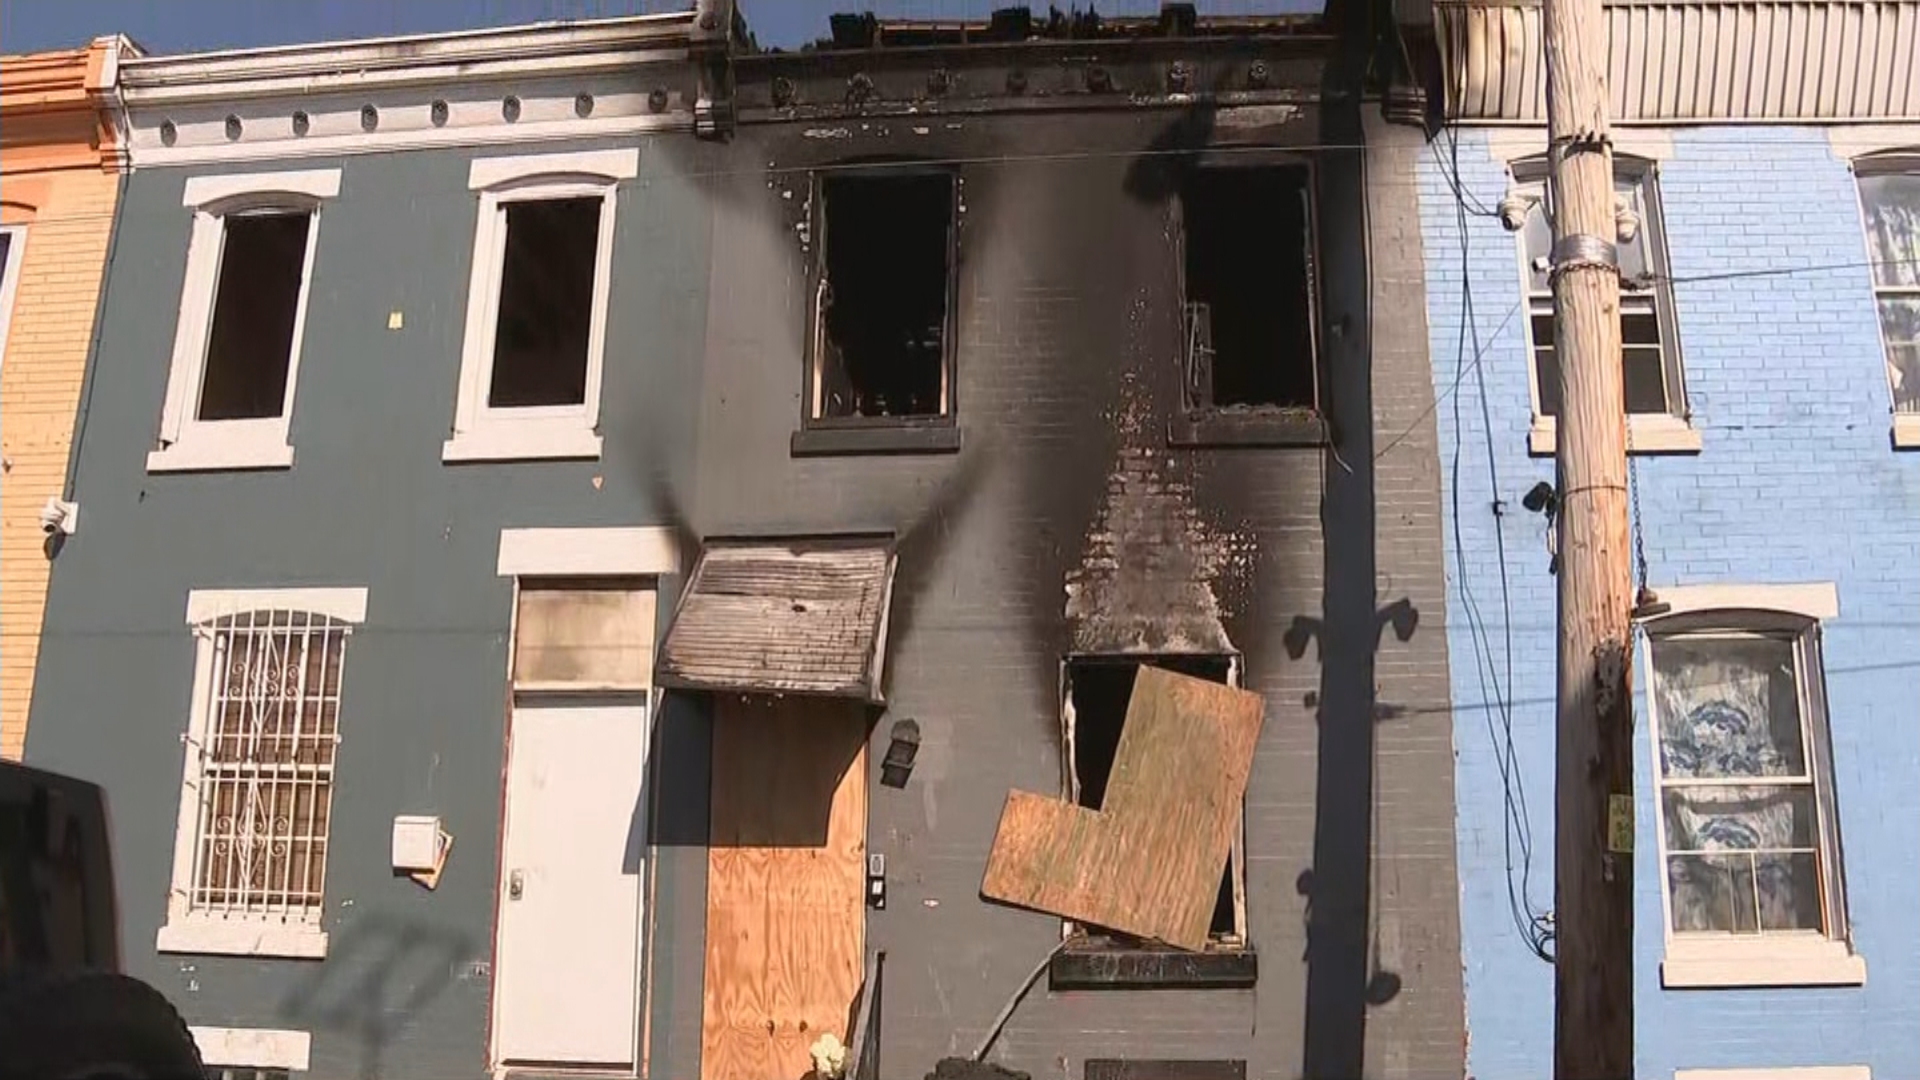 Fatal Rowhome Fire In Kensington Claimed Lives Of Father, 3 Sons; Mother Got Pushed Out Window To Survive